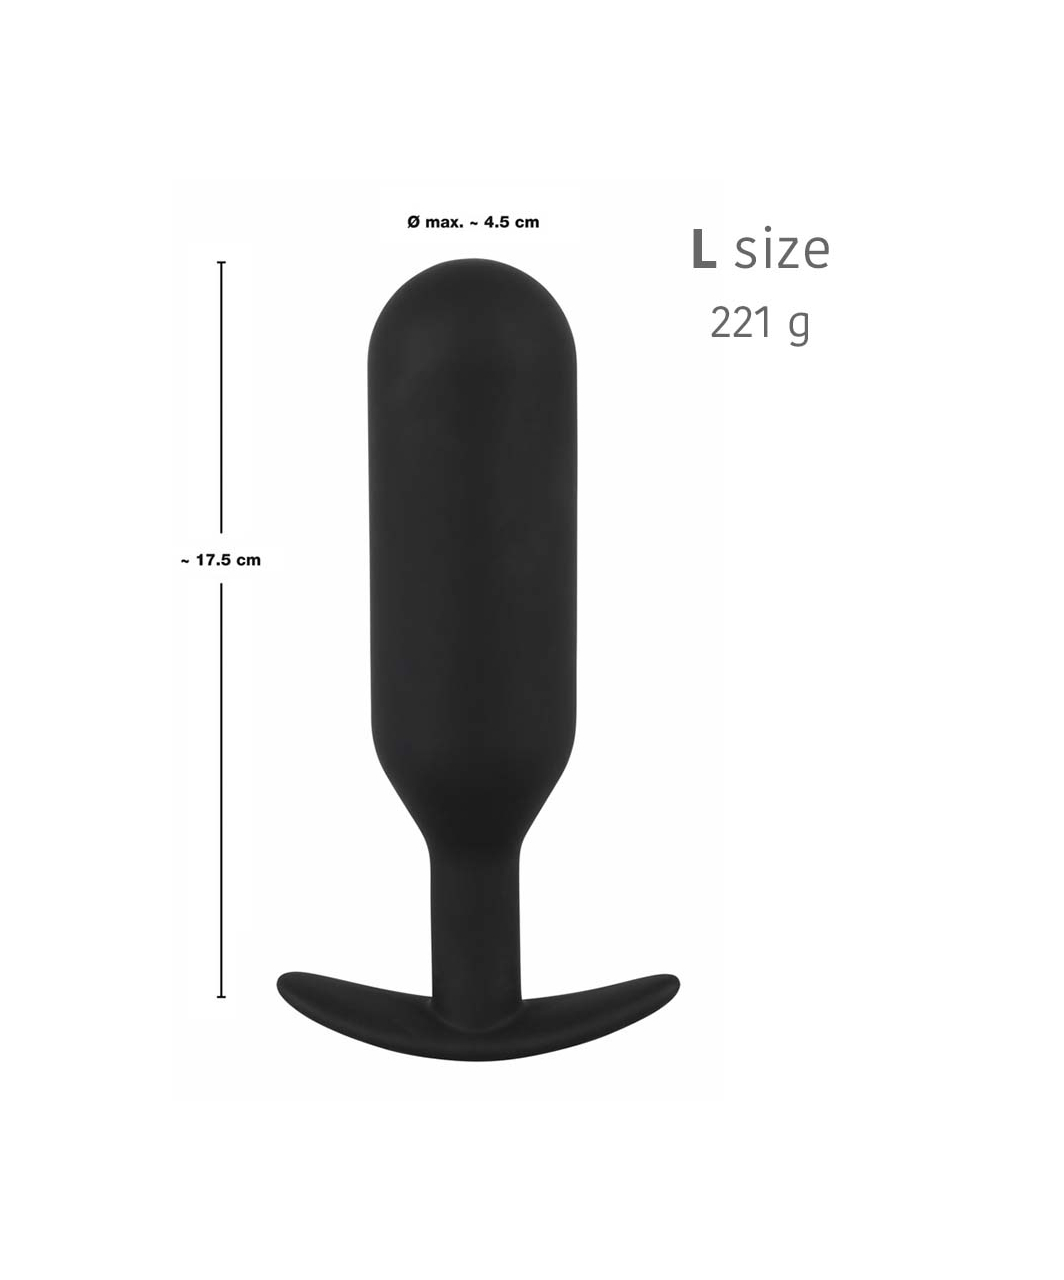 Black Velvets Weighted Anal Trainer